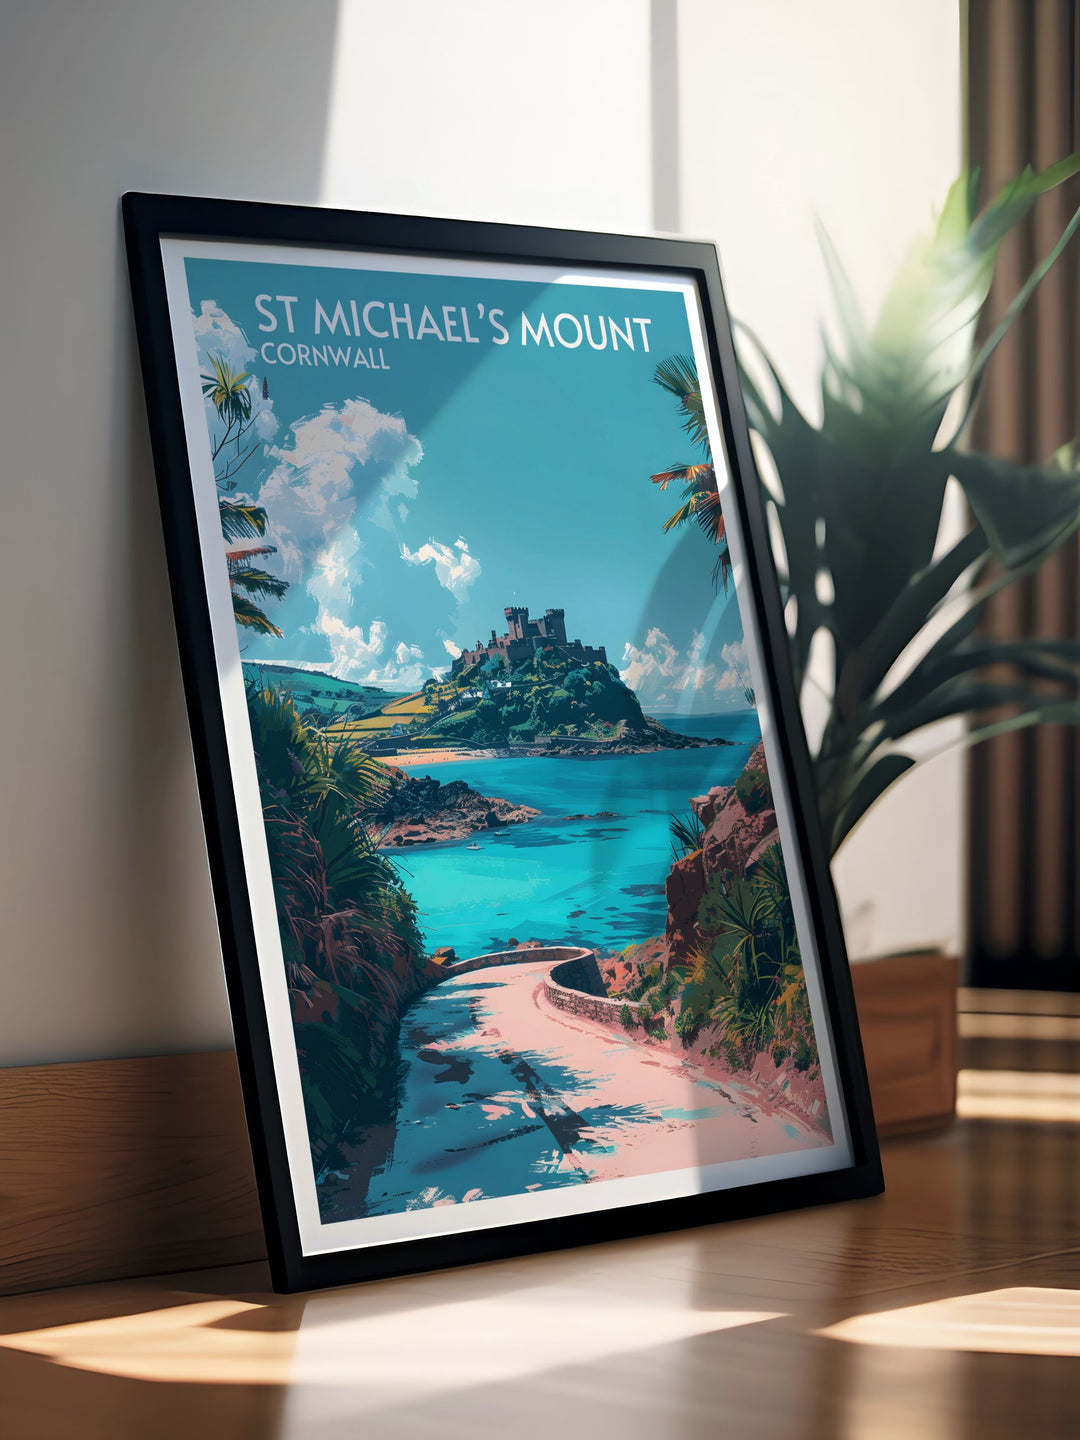 Framed print of Lands End capturing the iconic cliffs and dramatic sea views that define this landmark at the edge of Englands southwestern peninsula.